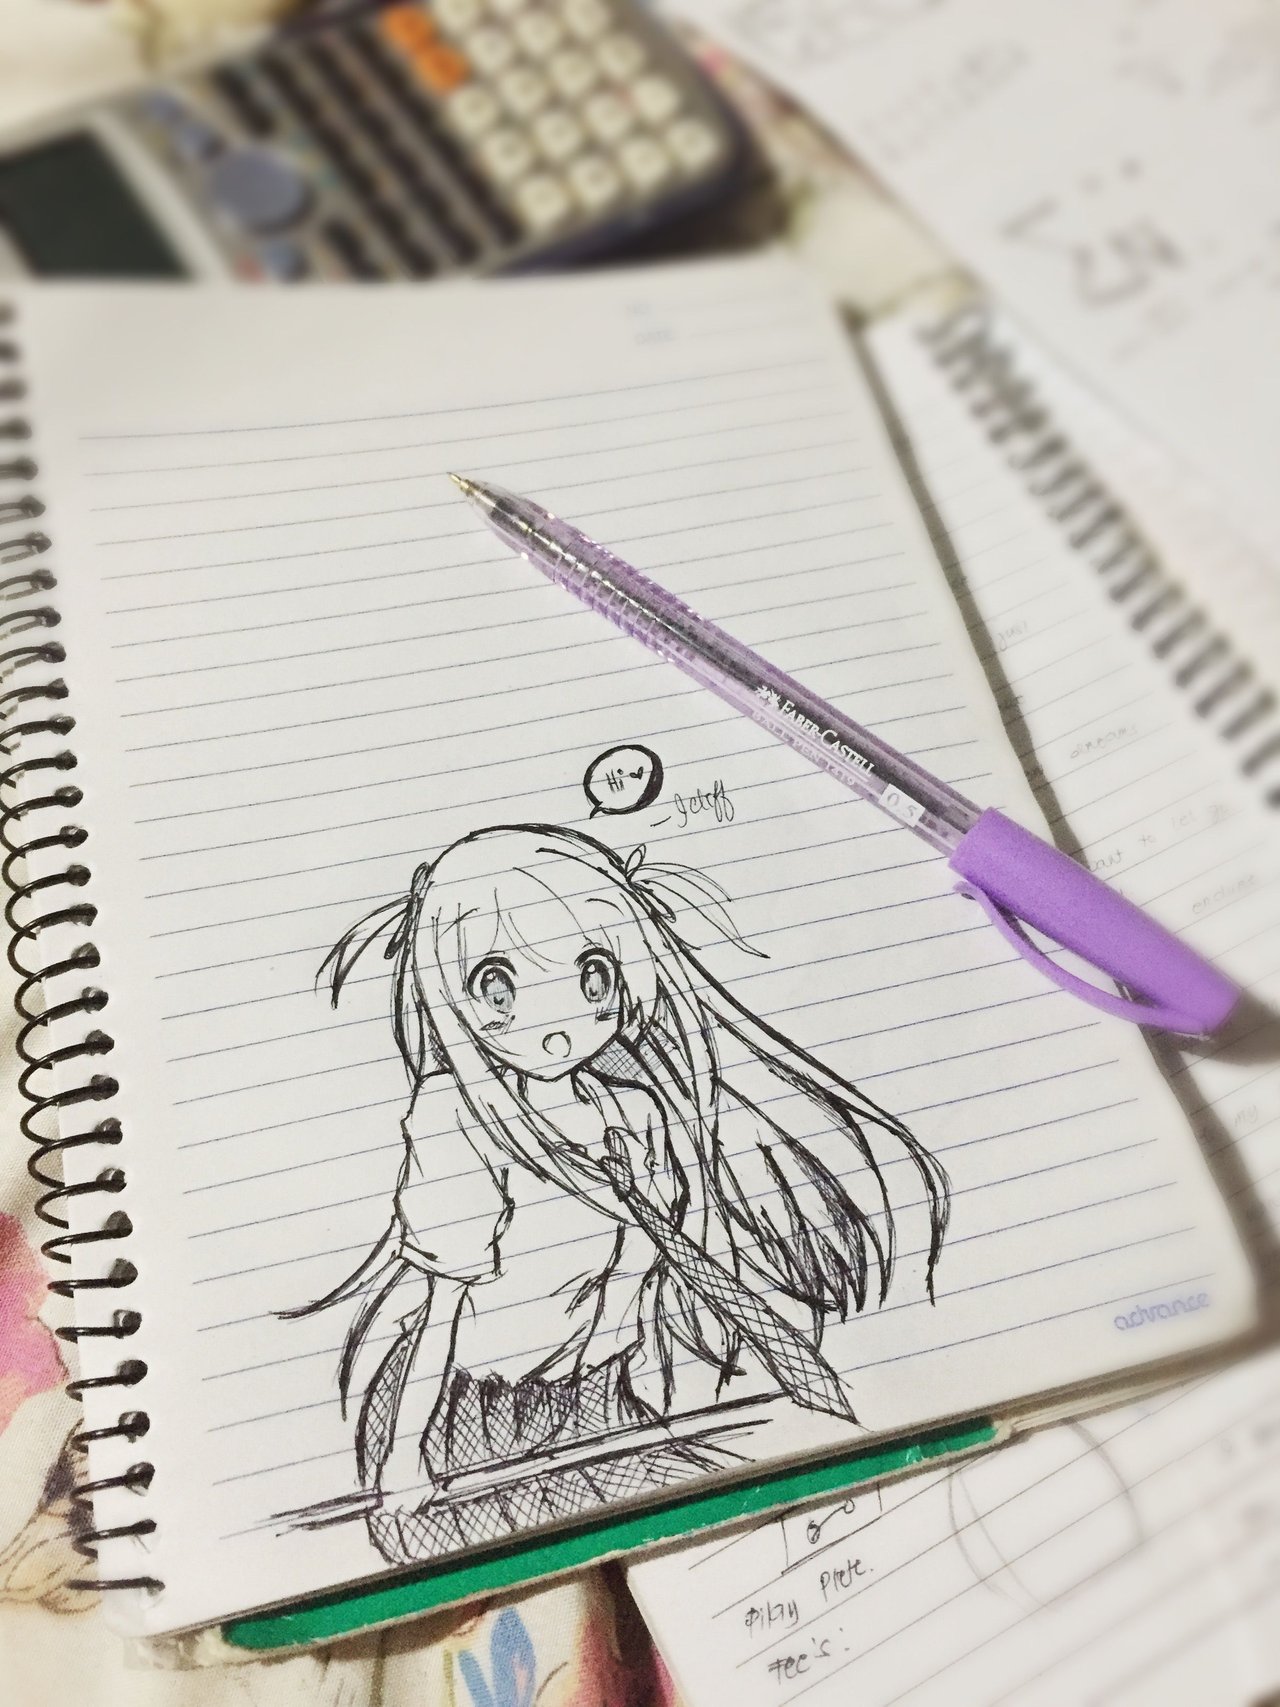  Simple Pen Anime Girl Drawing   by Green Cow Land  Medium